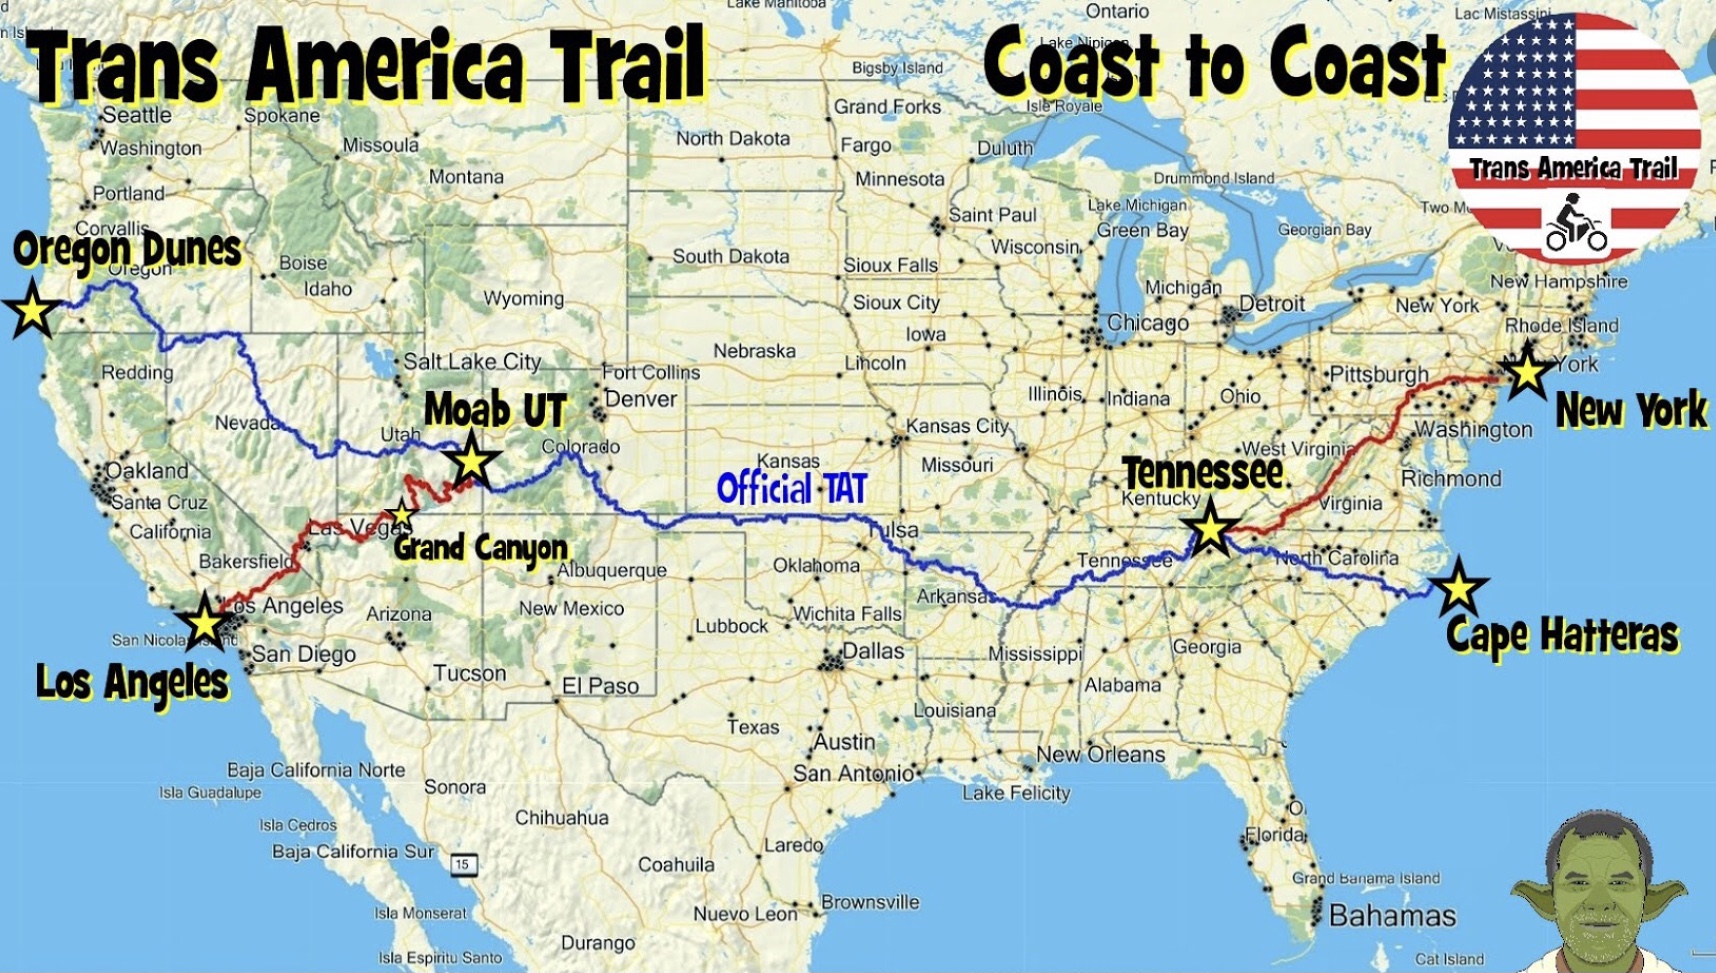 The Trans America Trail…from one coast to the other, a journal